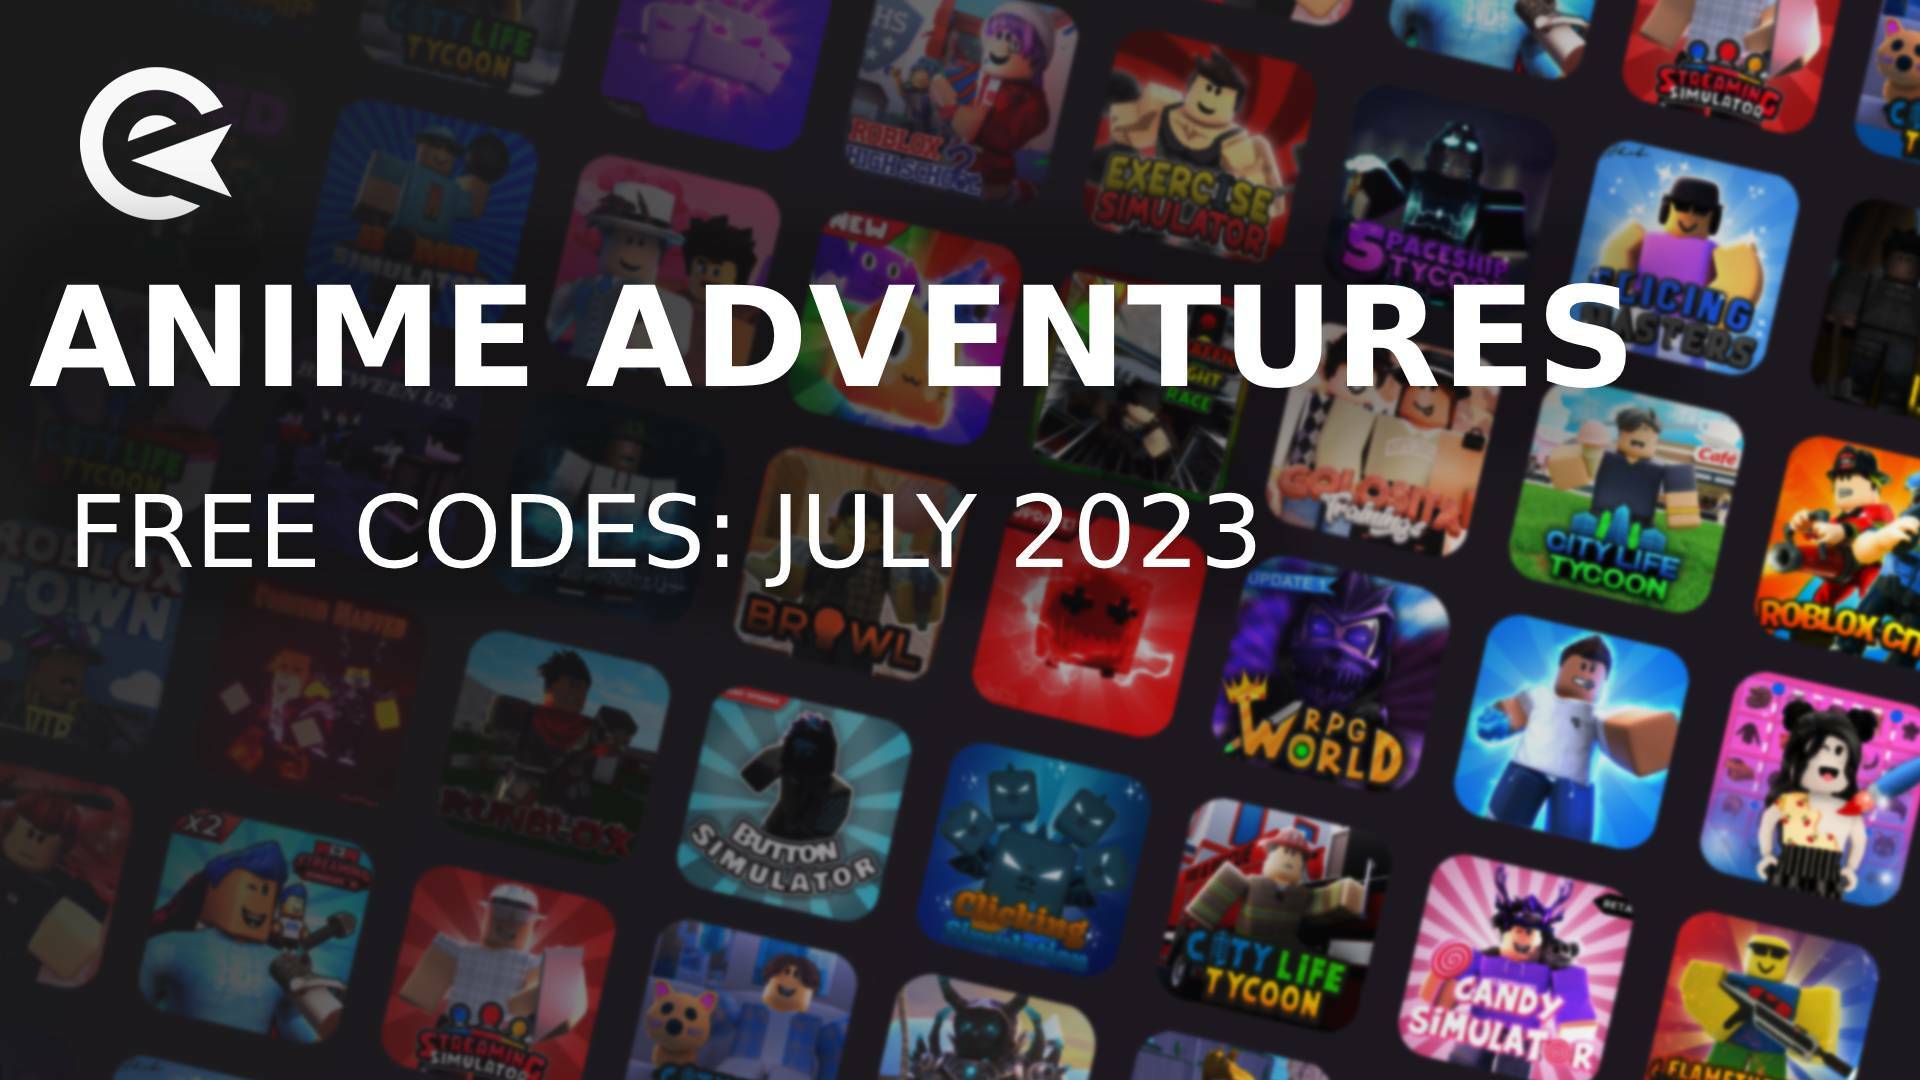 Anime Adventures Codes July 2023  New Codes Added  GINX Esports TV